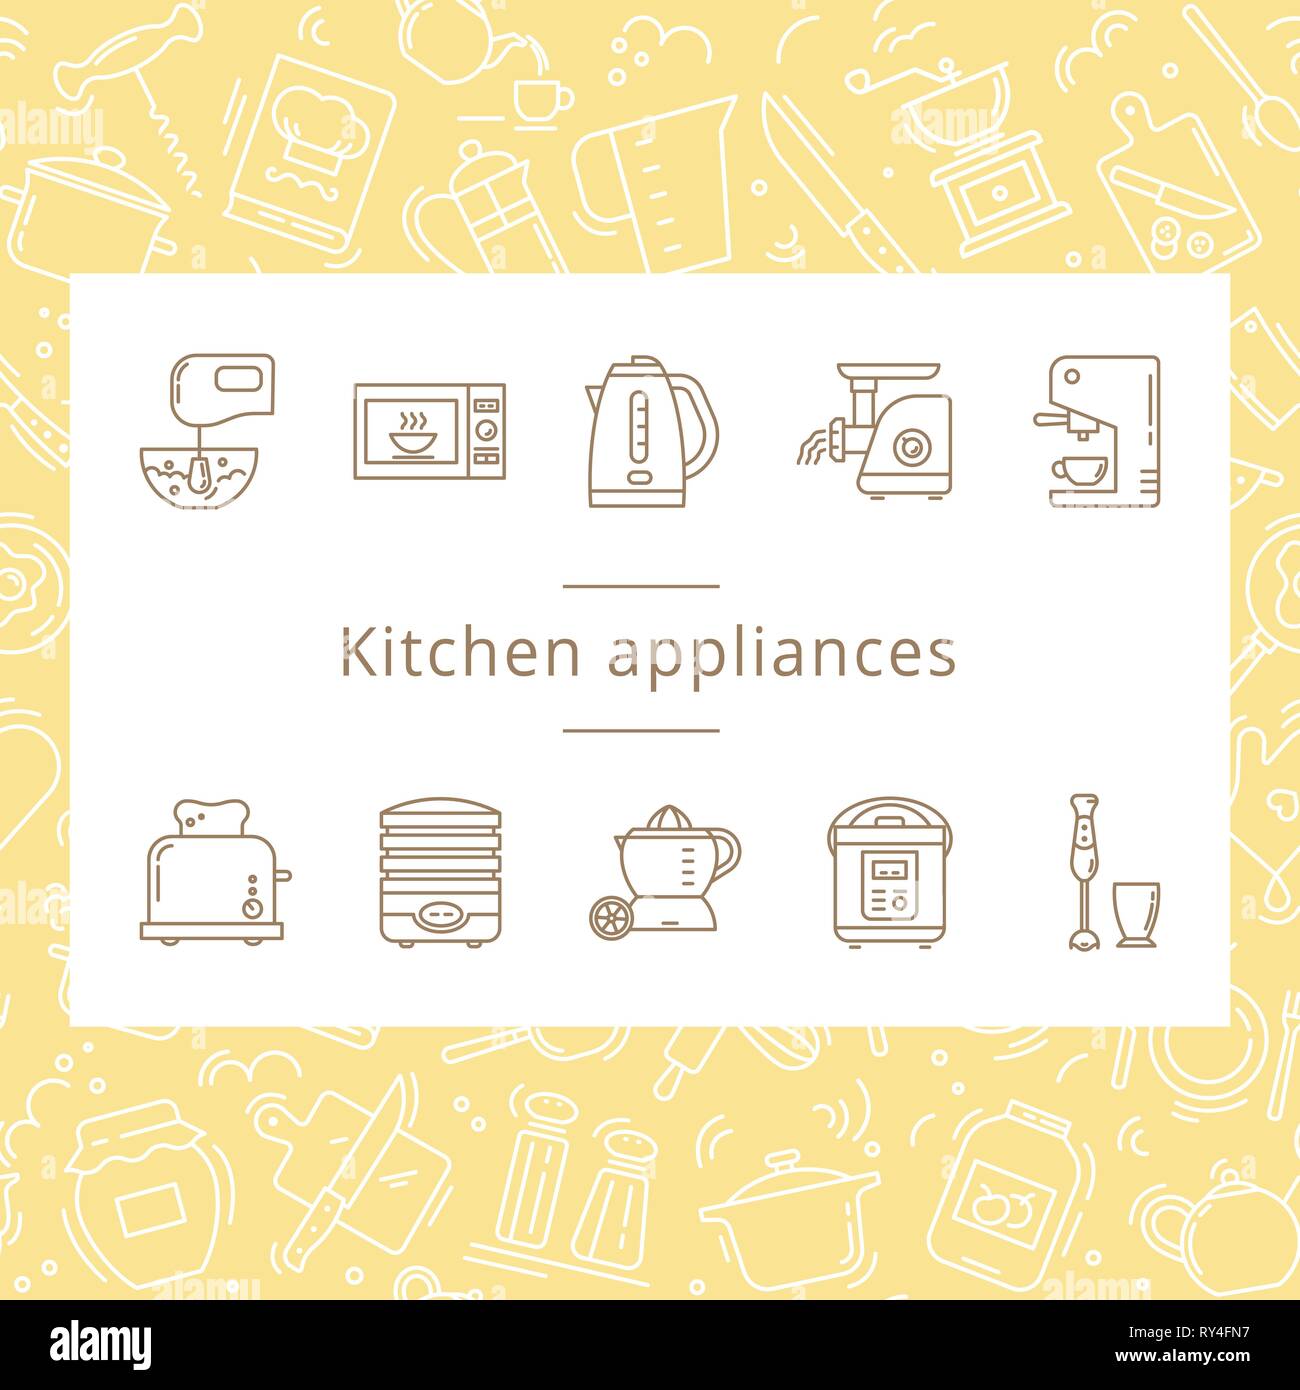 Set of kitchen appliances icons in line style isolated on the white background. Stock Vector